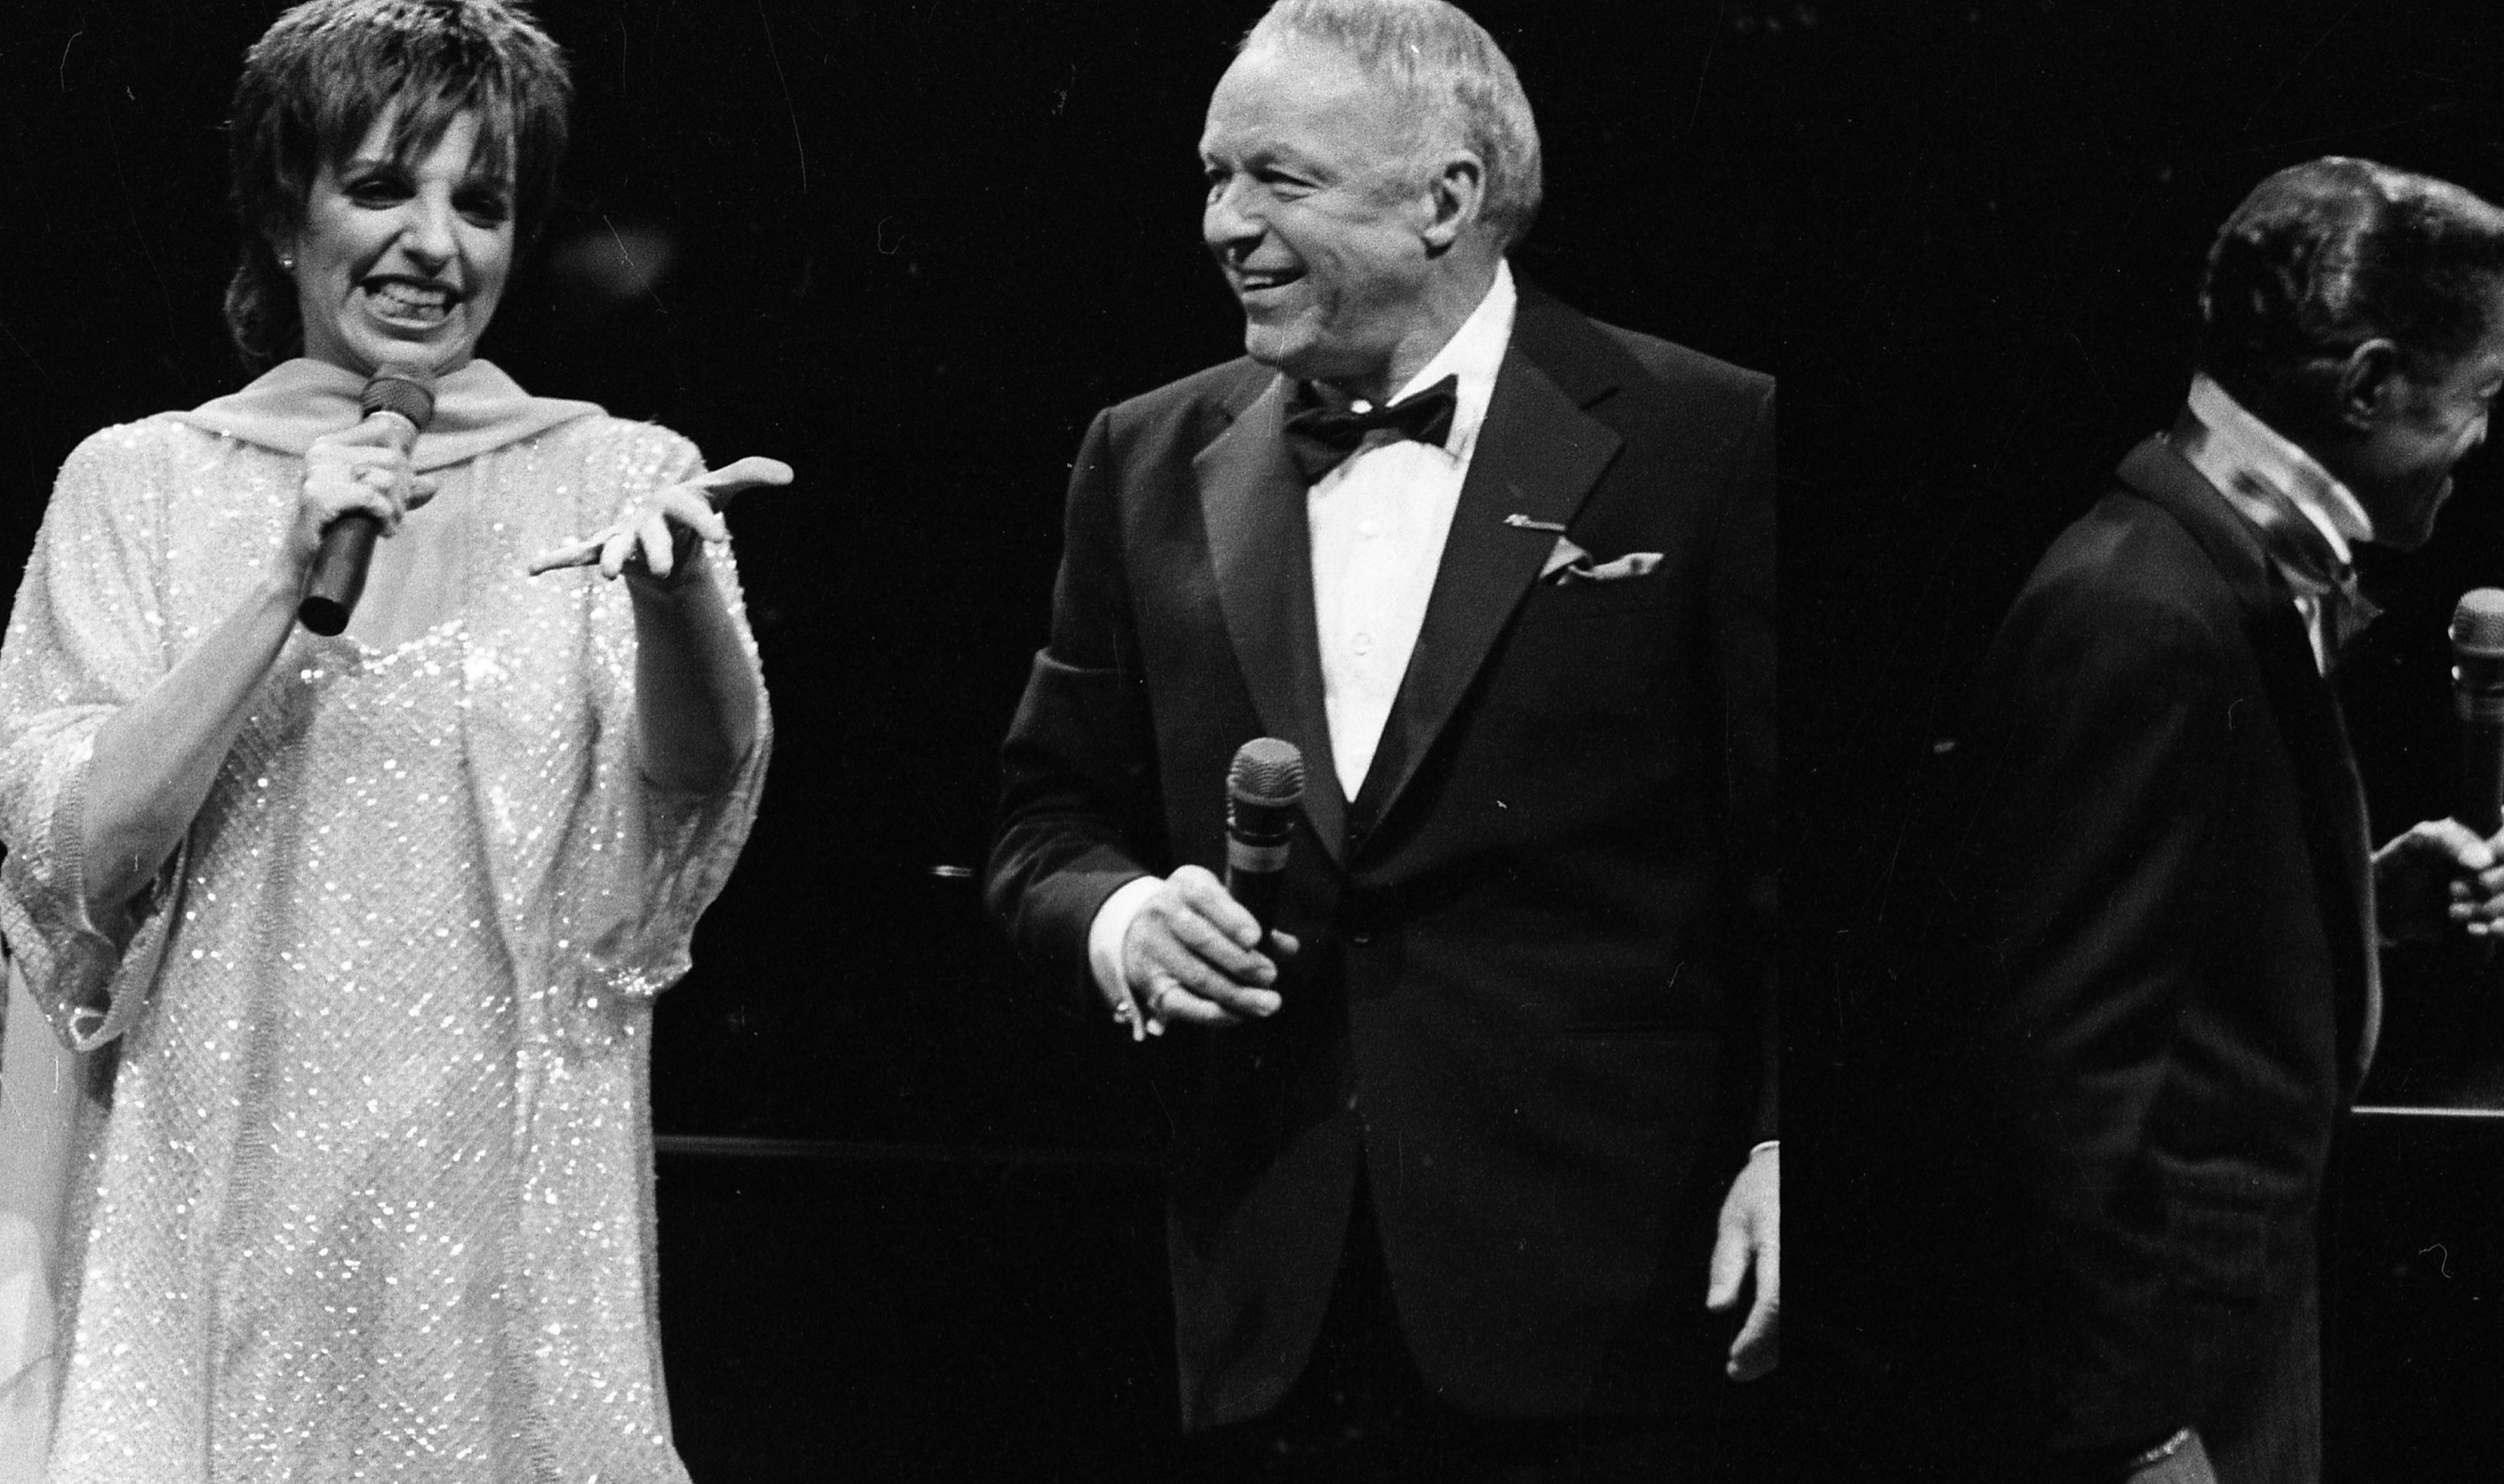 A black and white photo of Liza Minnelli and Frank Sinatra holding microphones. Sammy Davis Jr. faces away from the camera.